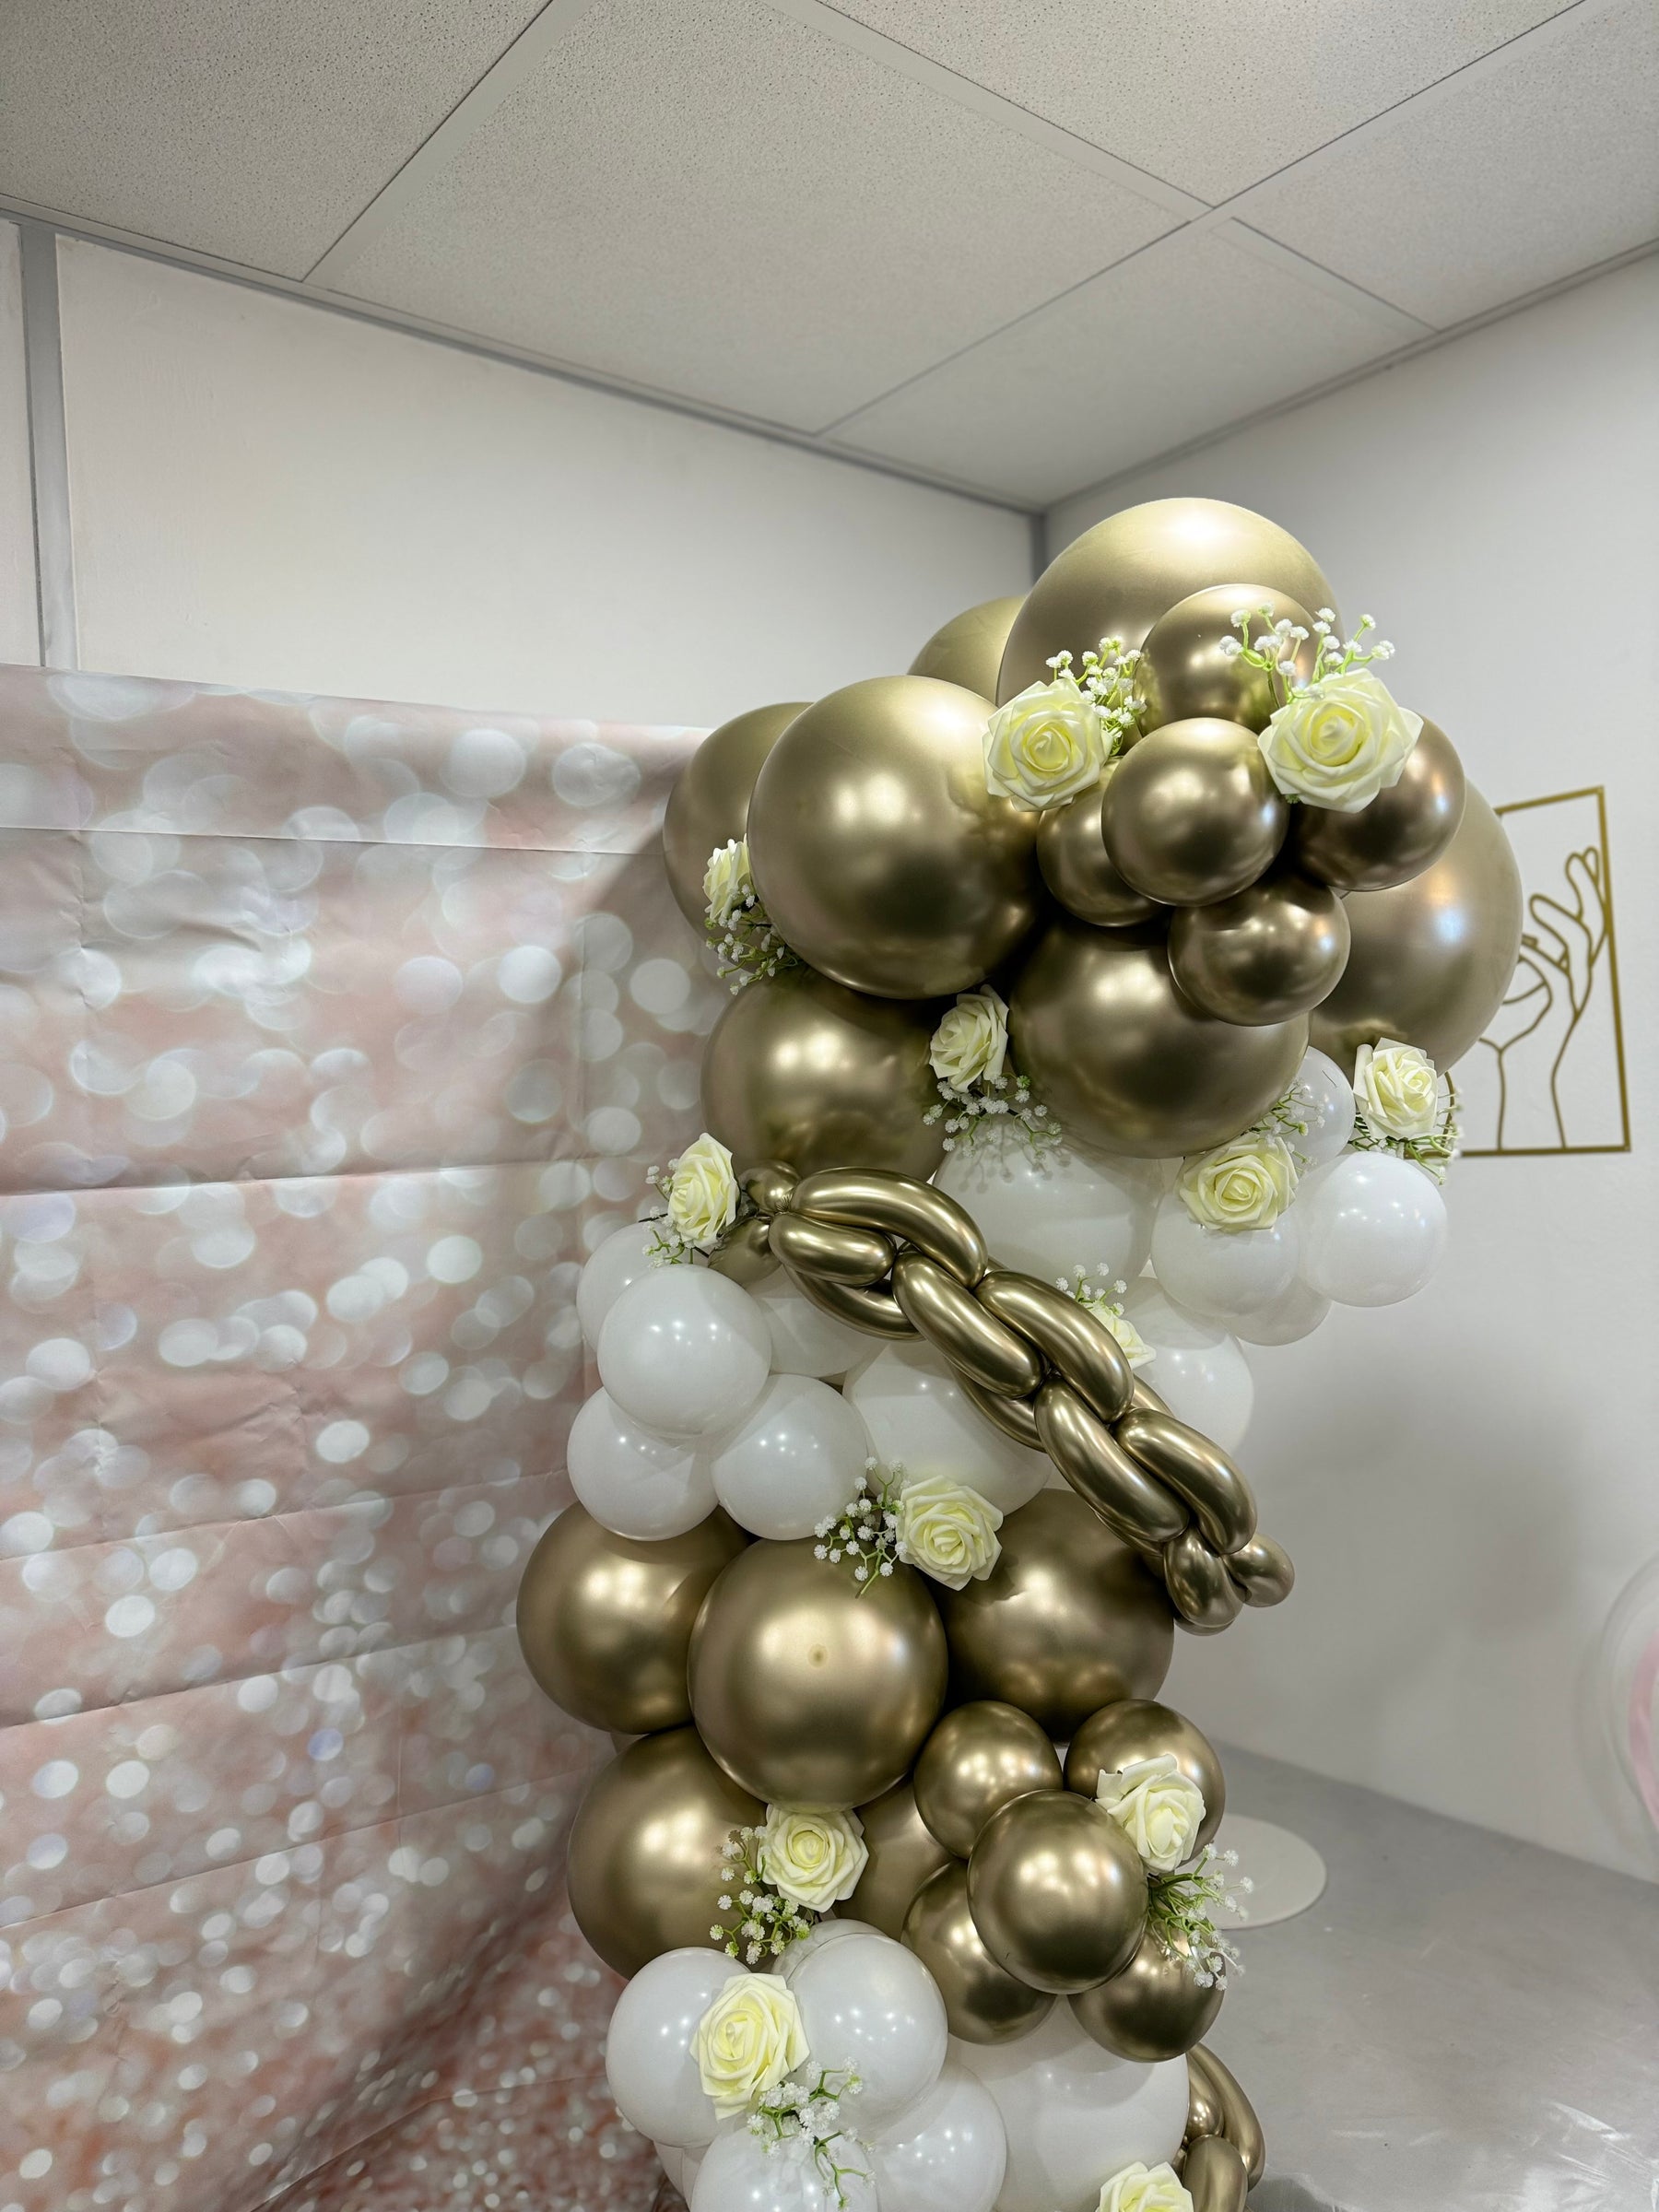 1- White and Gold birthday balloons